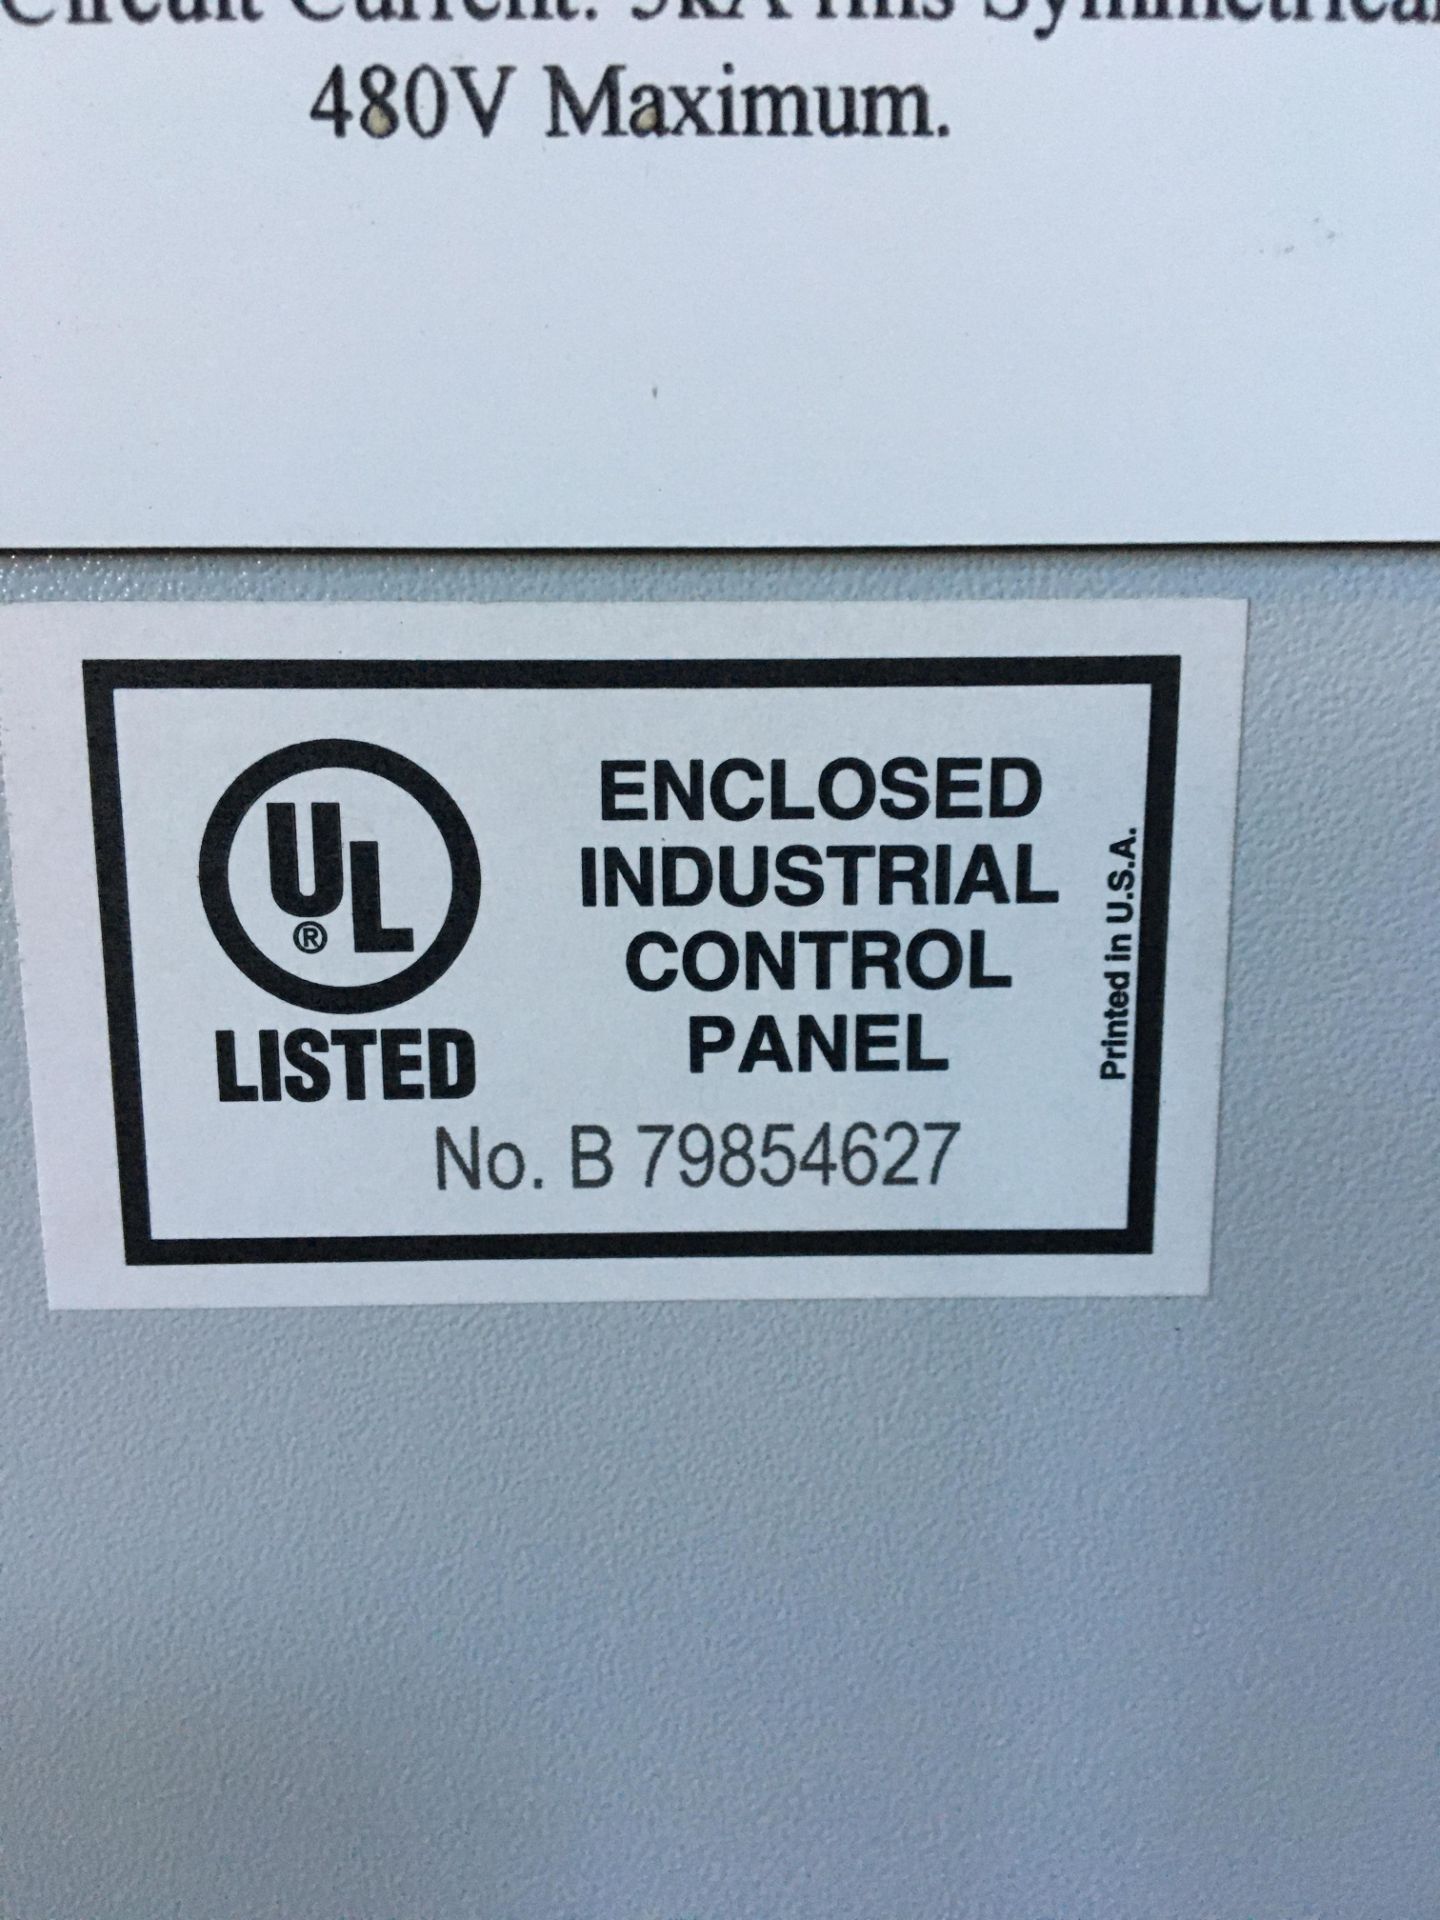 Specialty Systems Integrators Multiple Source Circuit Breaker Box/ Control Panel, Model B79854627, - Image 14 of 17